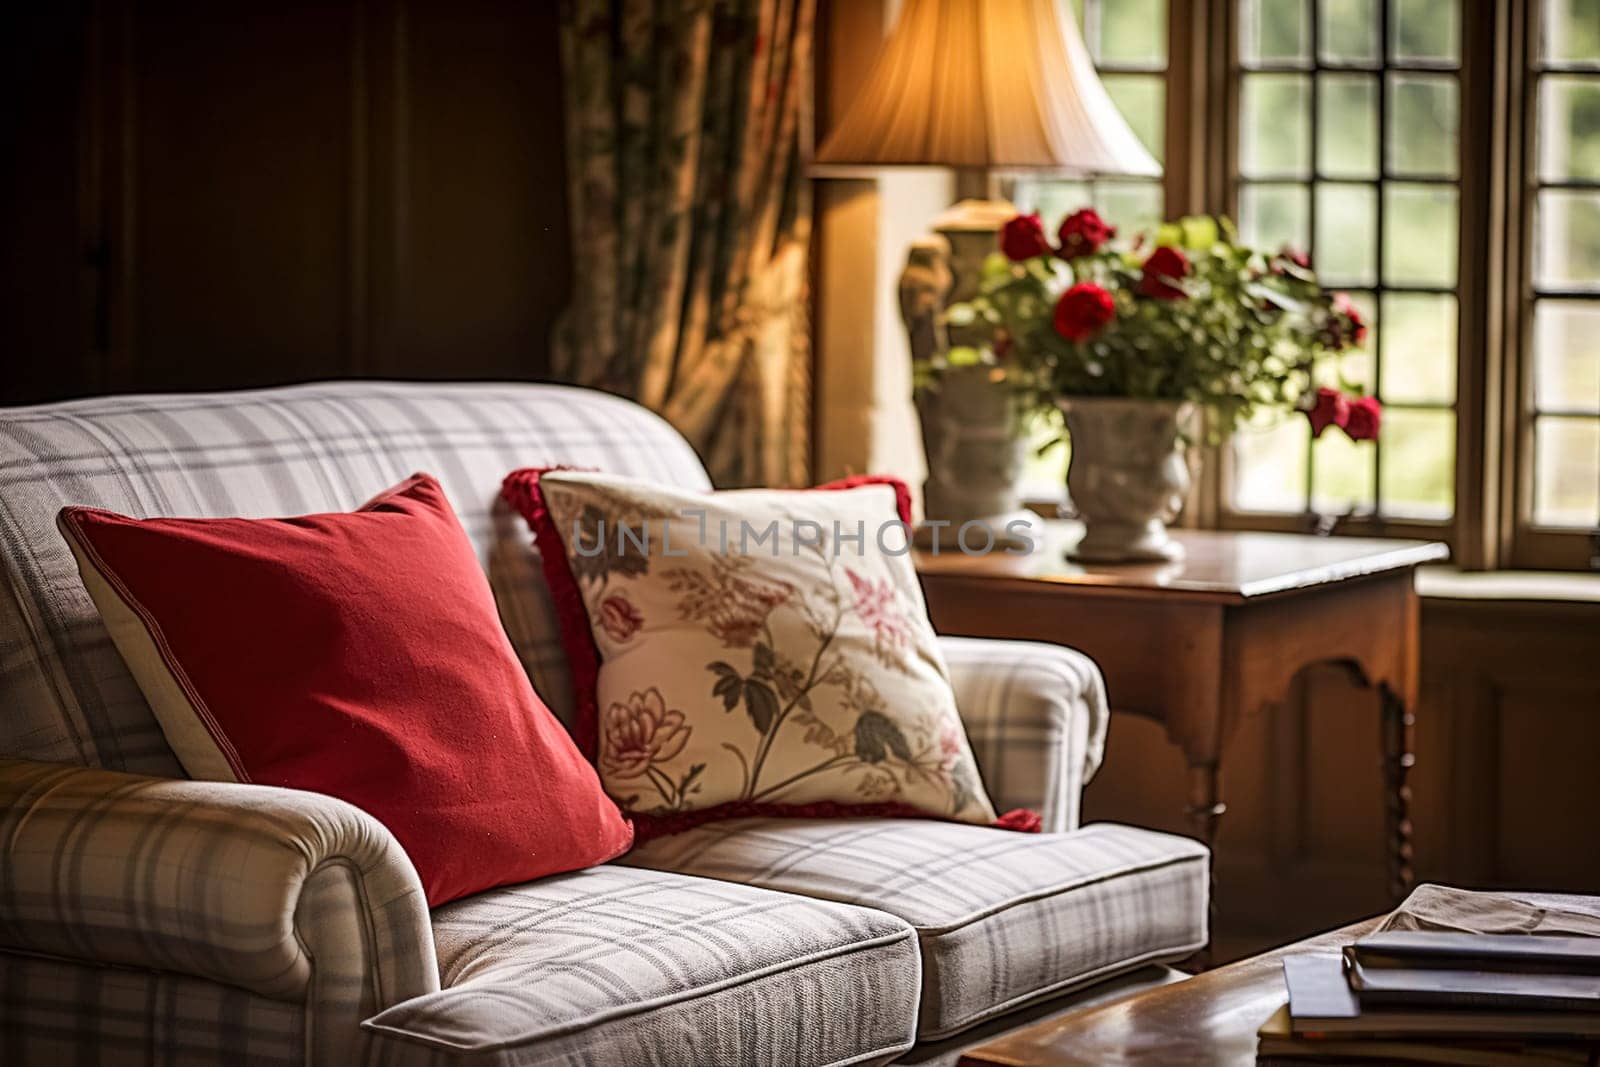 Cottage sitting room, living room interior design and country house home decor, sofa and furniture, English countryside style interiors